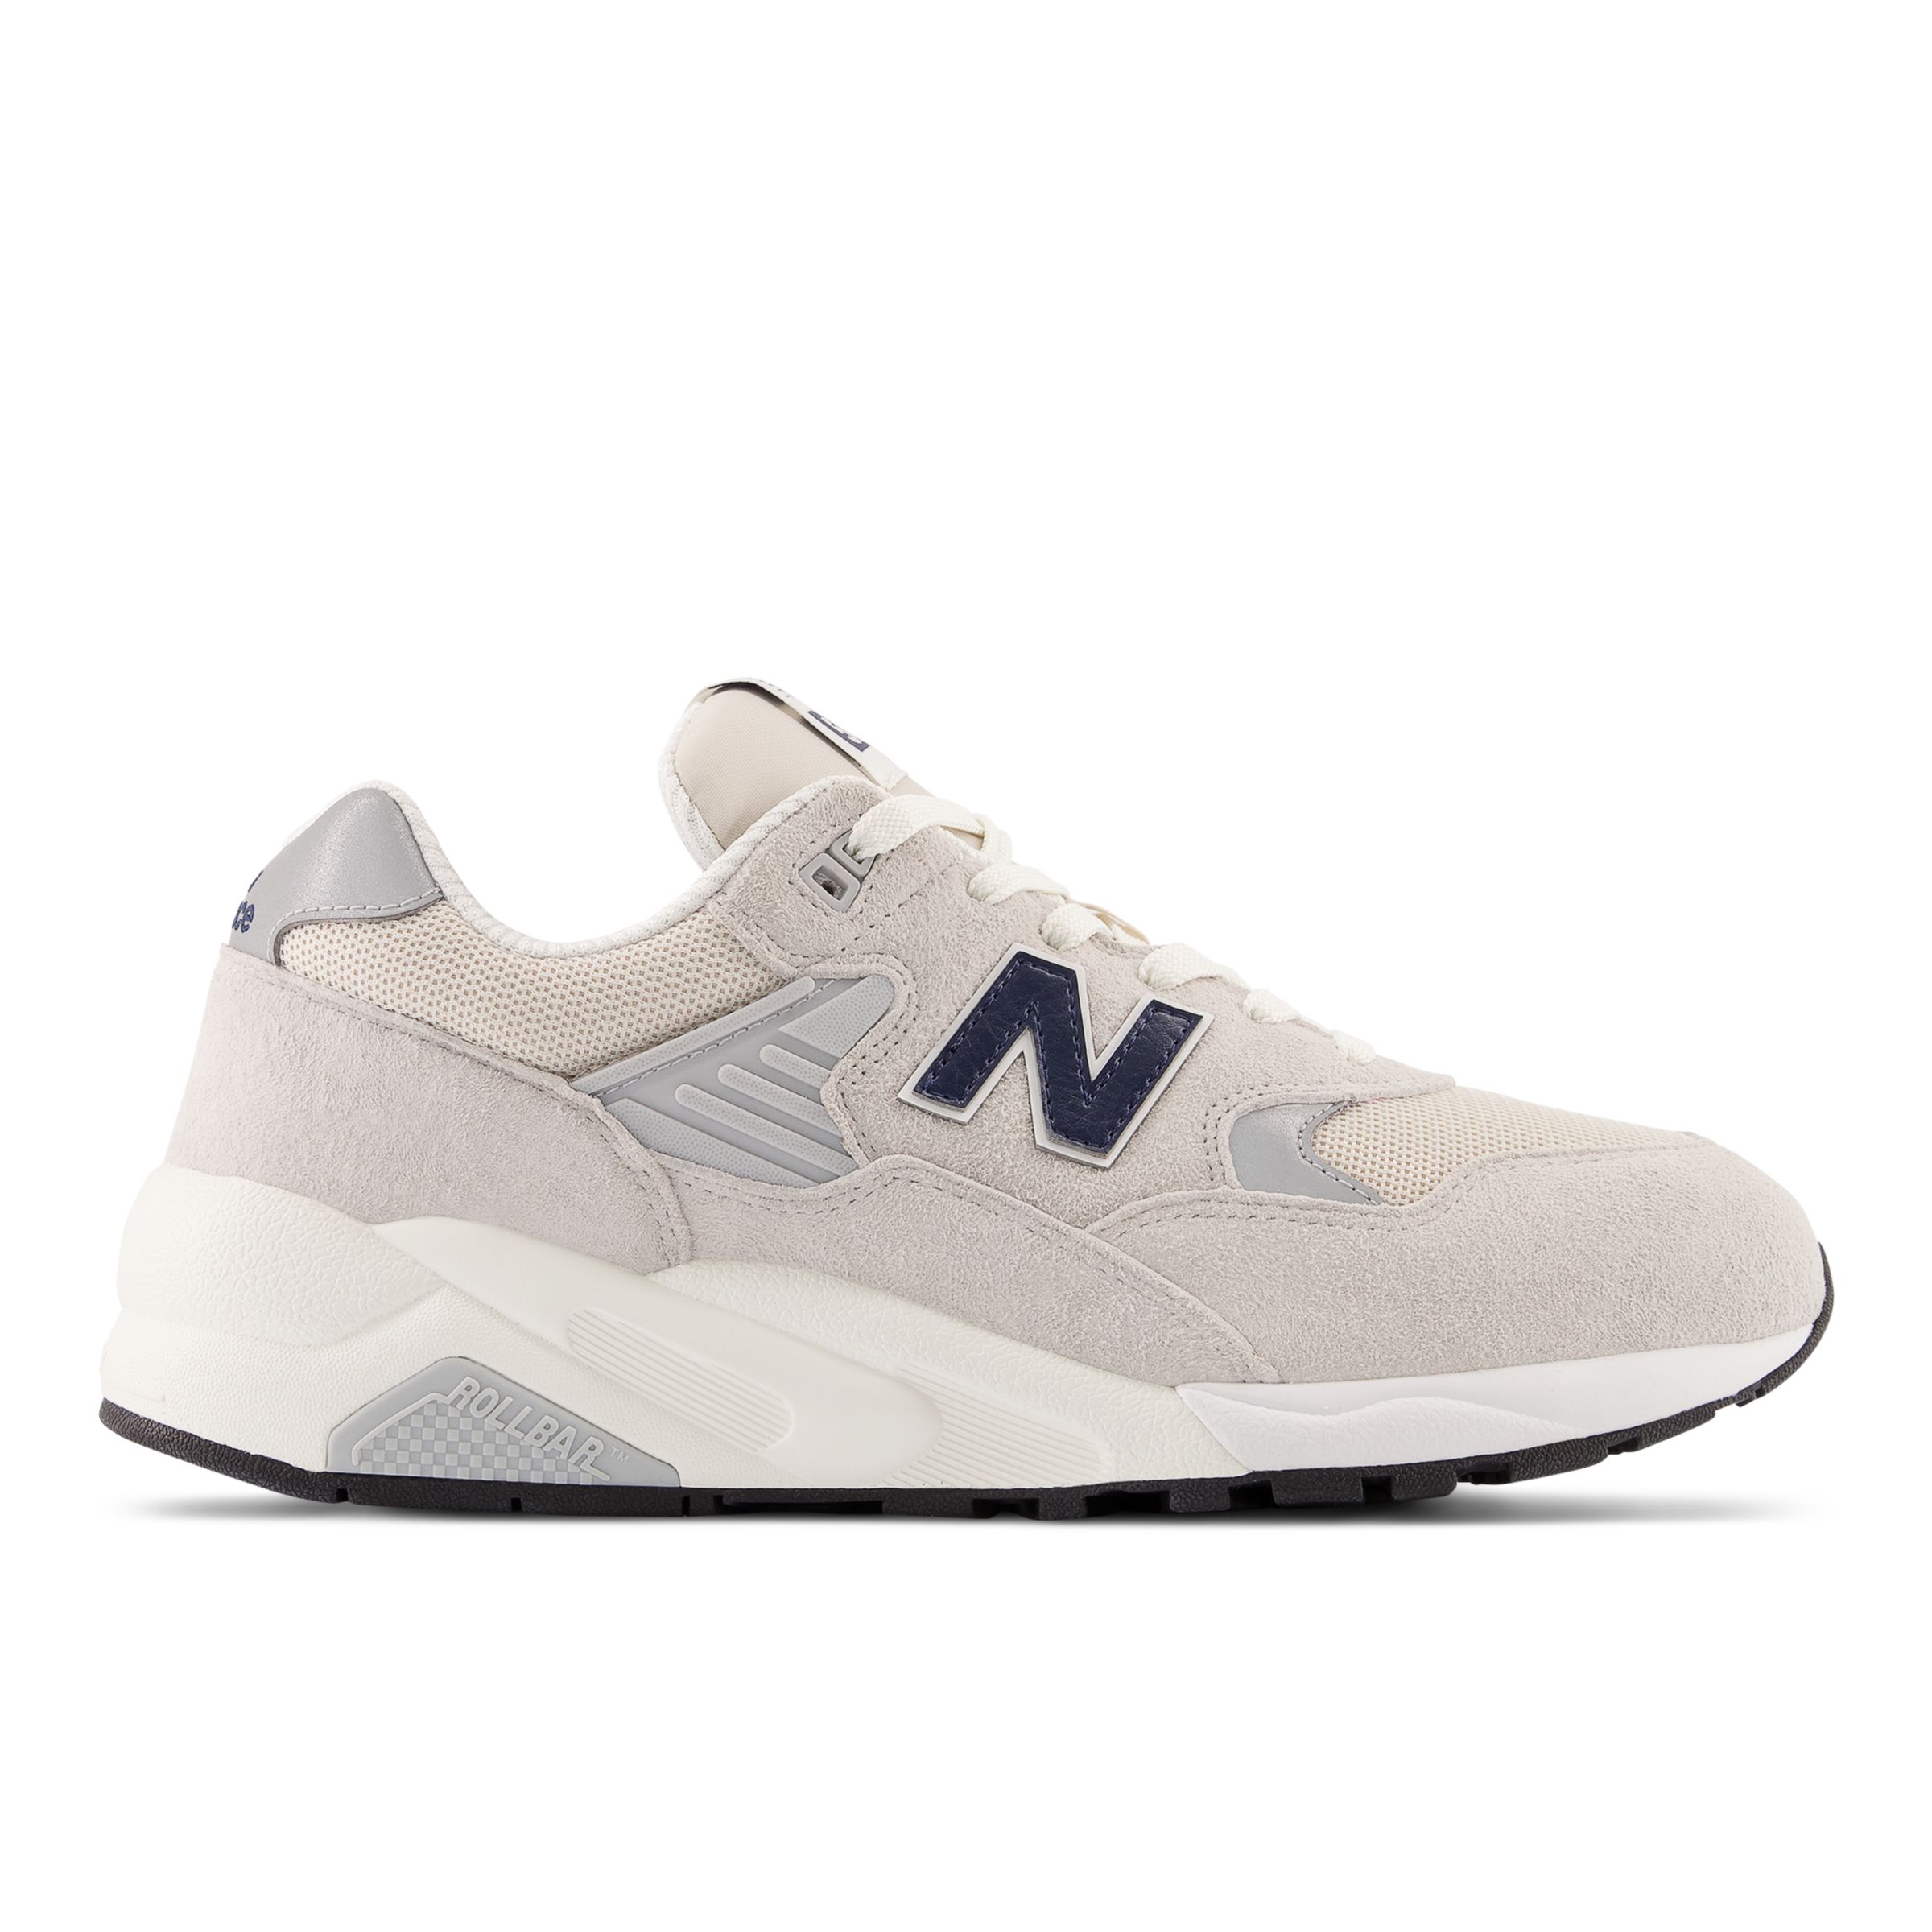 new balance mens bb480lv1 whitered whitered, New Balance Hombre in Gris/Gris/Azul/Bleu/Blanca/blanc, Leather